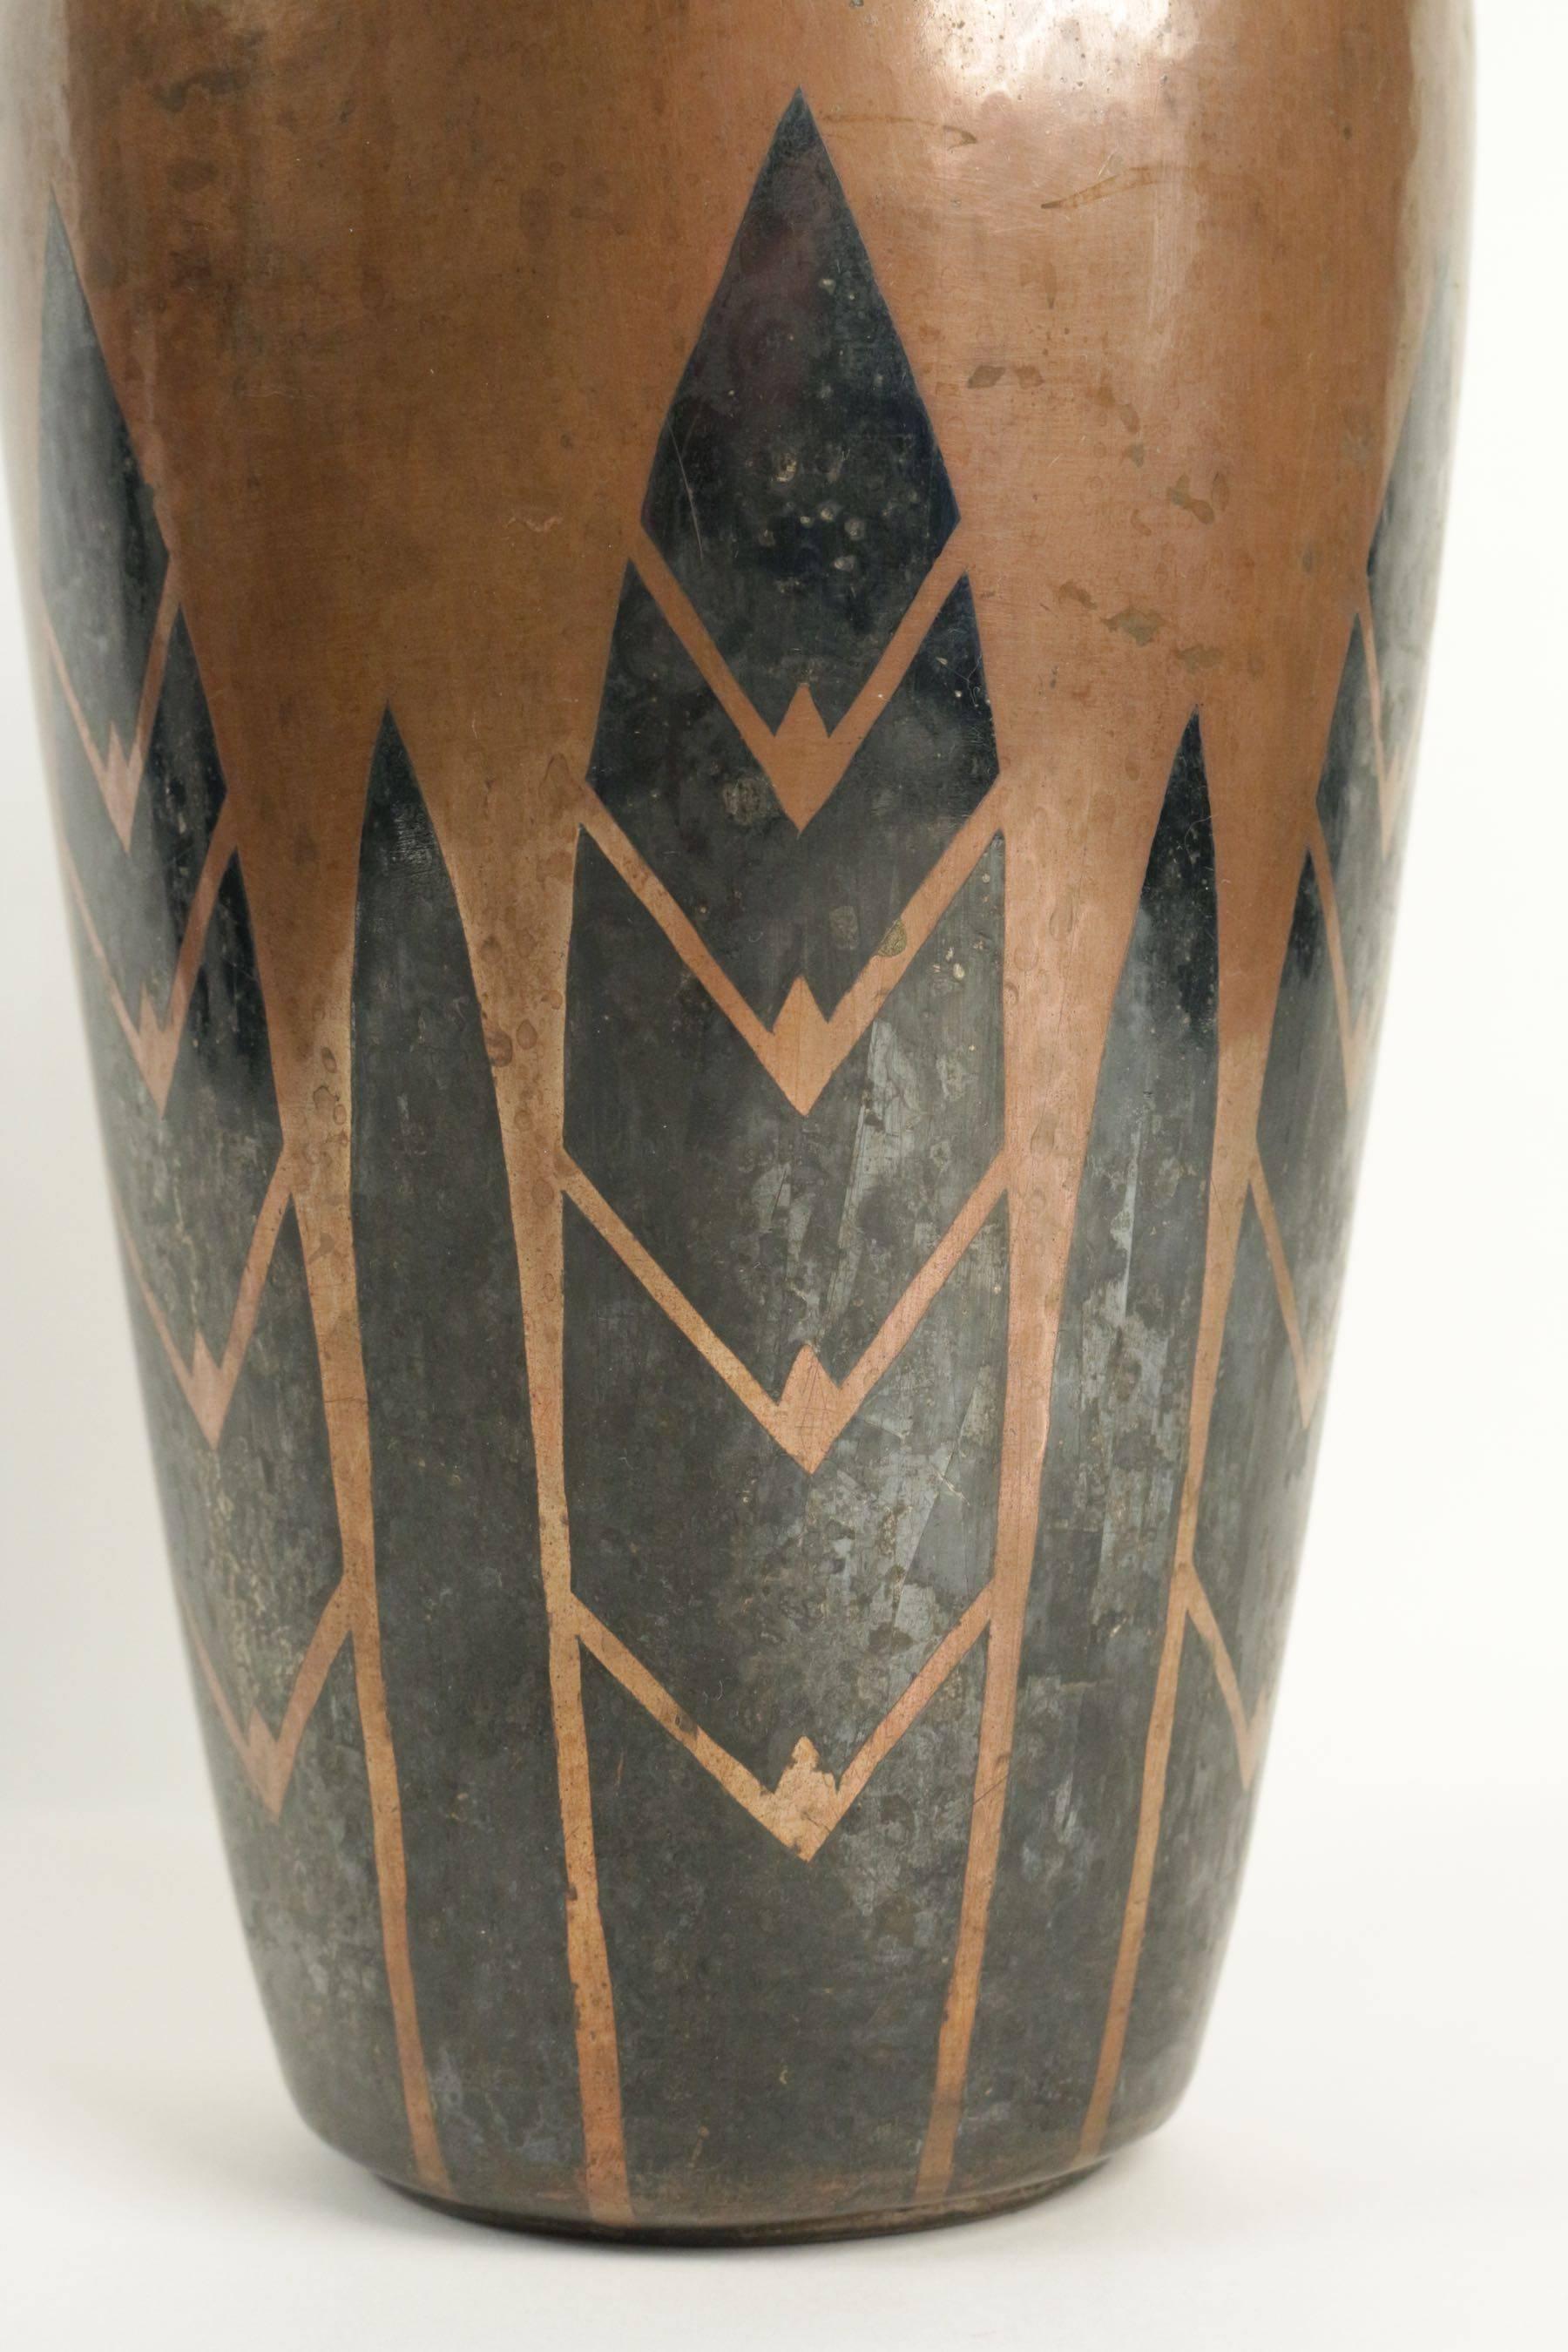 Christofle Travail de Luc Lanel (1893-1965) pour Christofle.
Oval dinanderie vase featuring geometric leaves patterns in copper and silver. “Dinanderie” is a metalworking technique using a single piece of flat metal (copper, brass, silver, tin,